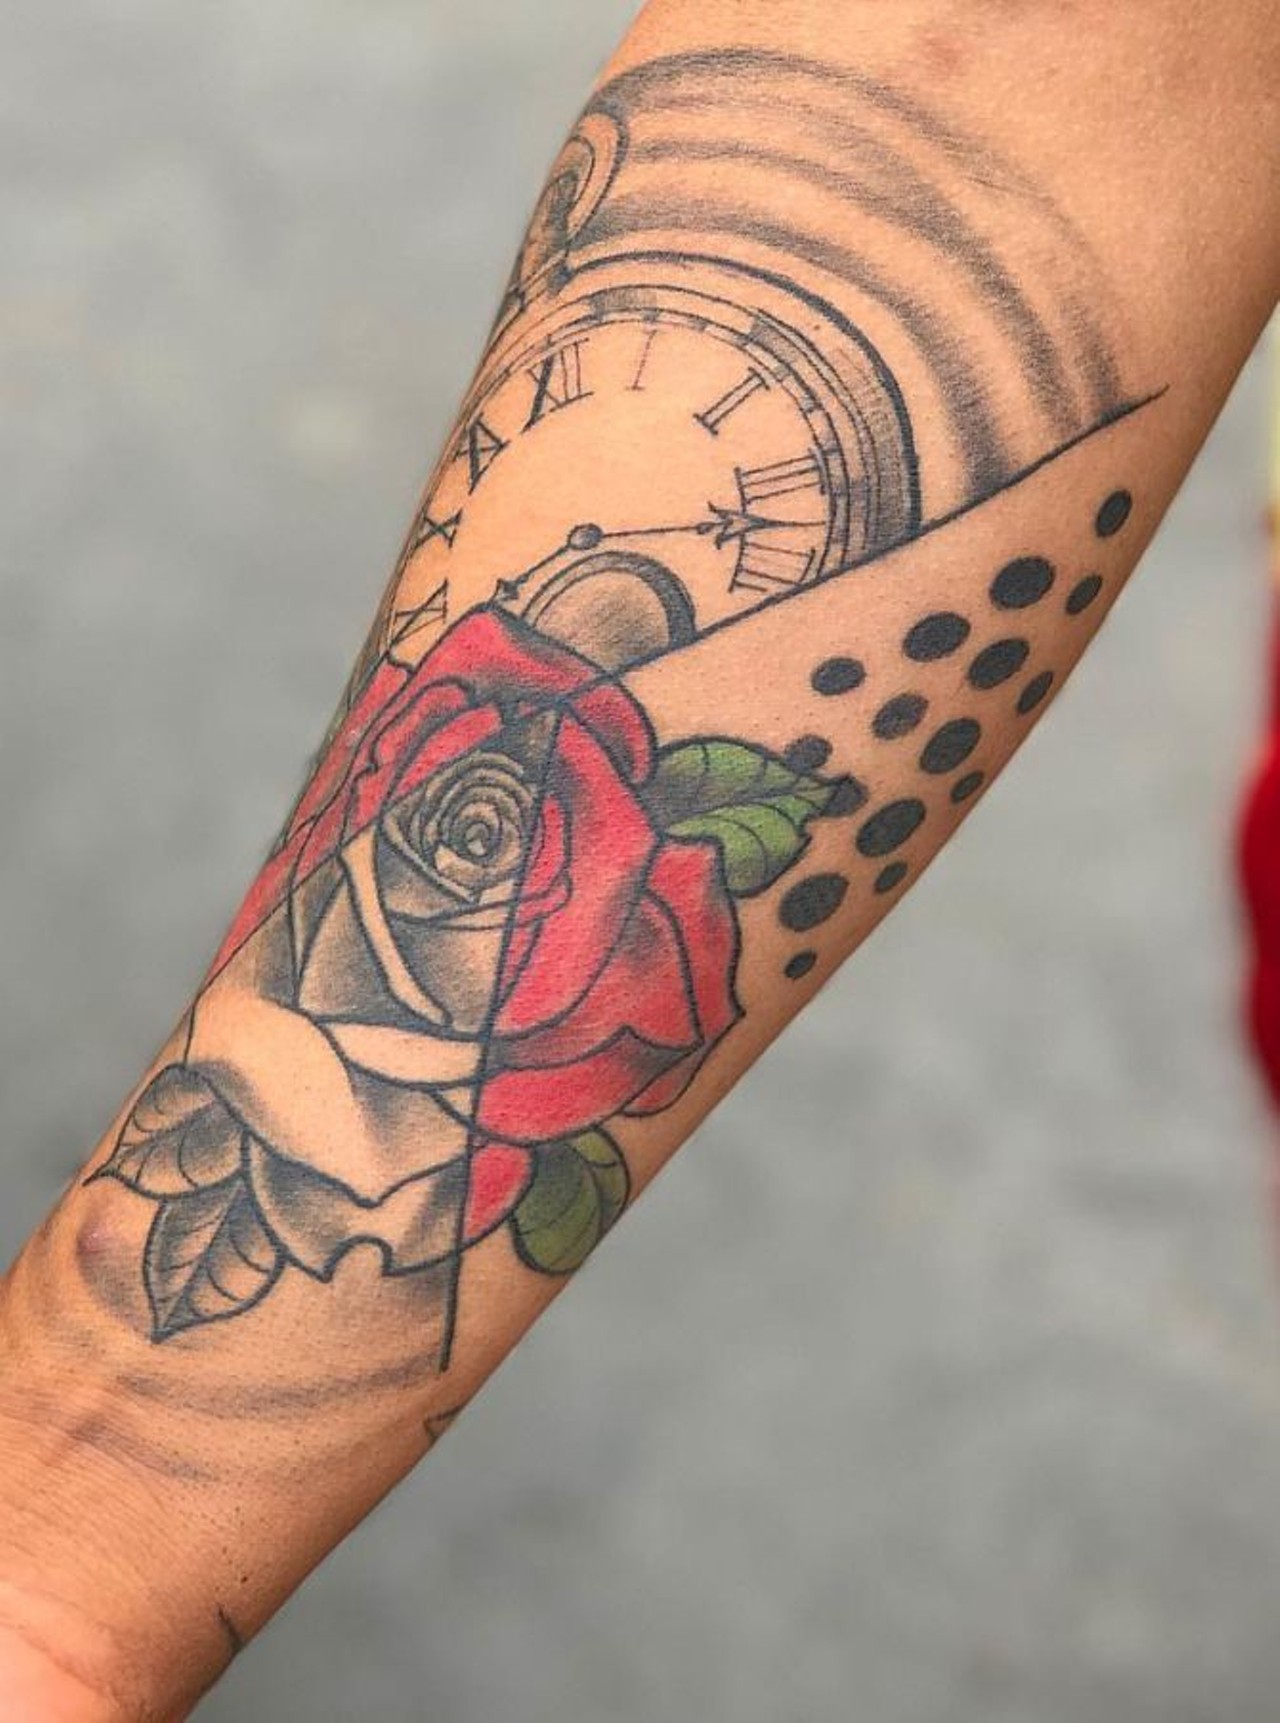 🔥🔥 10 Cleveland Tattoo Artists You May Follow Now!